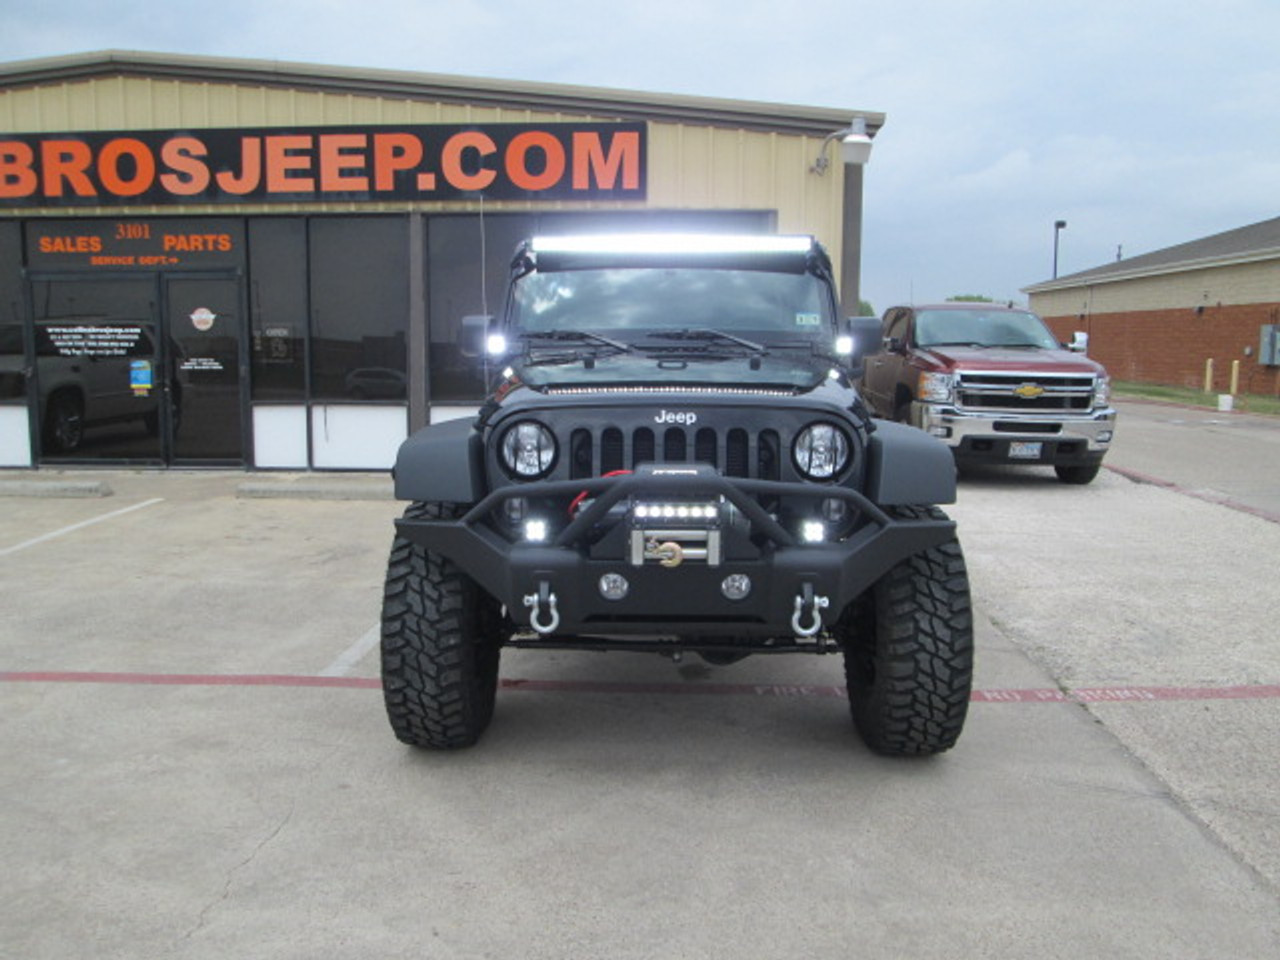 SOLD 2014 Jeep Wrangler Rubicon Unlimited Stock# 248123